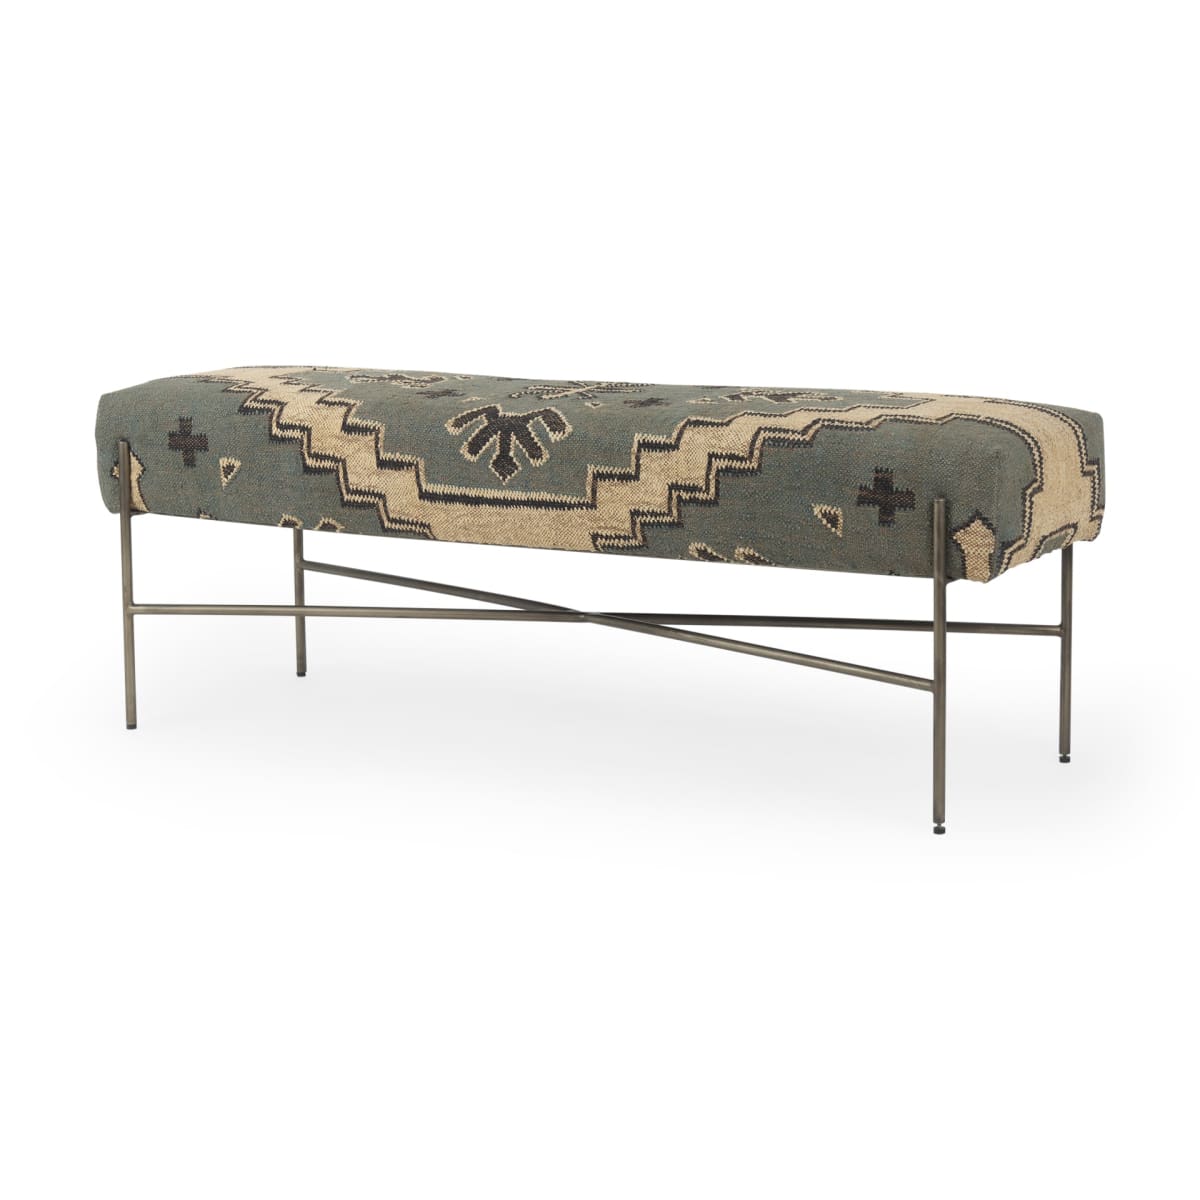 Avery Bench Multi Colored Fabric | Black Metal - benches